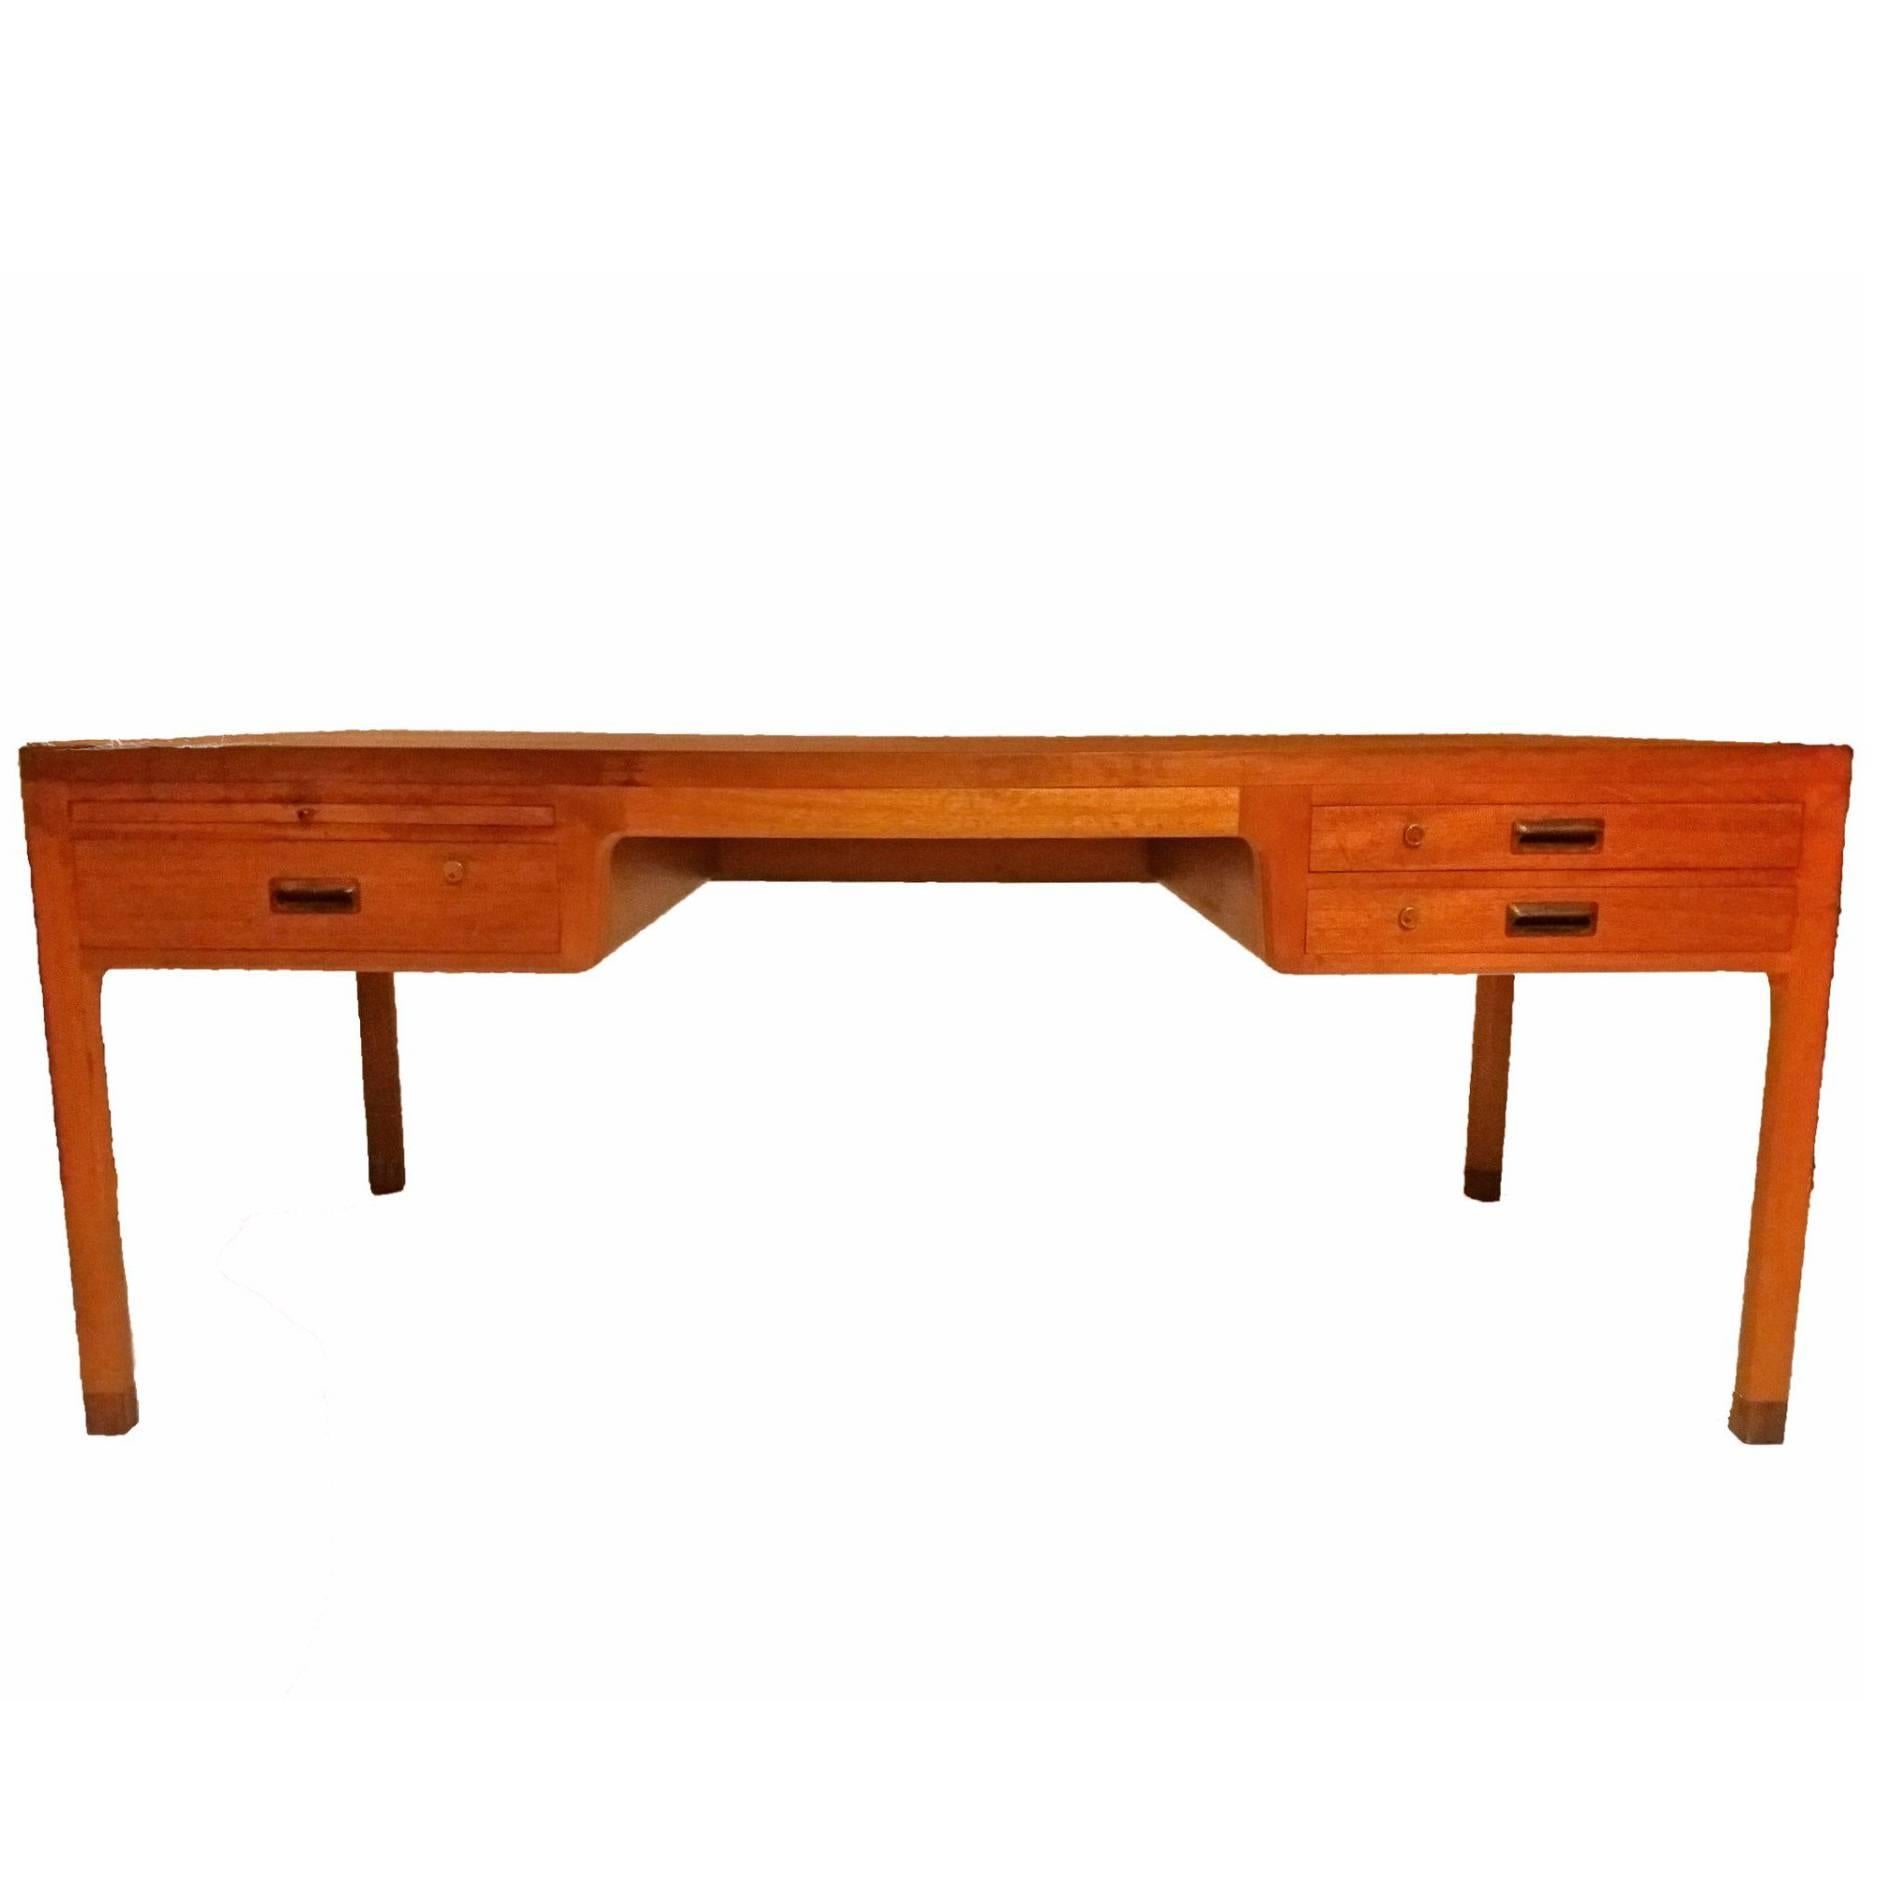 Superb Danish Mid-Century Modern freestanding desk by Aksel Bender Madsen & Ejner Larsen for Willy Beck. This handcrafted teak desk comes with two drawers on one side and one drawer and a pull-out writing surface on the other. The drawers have